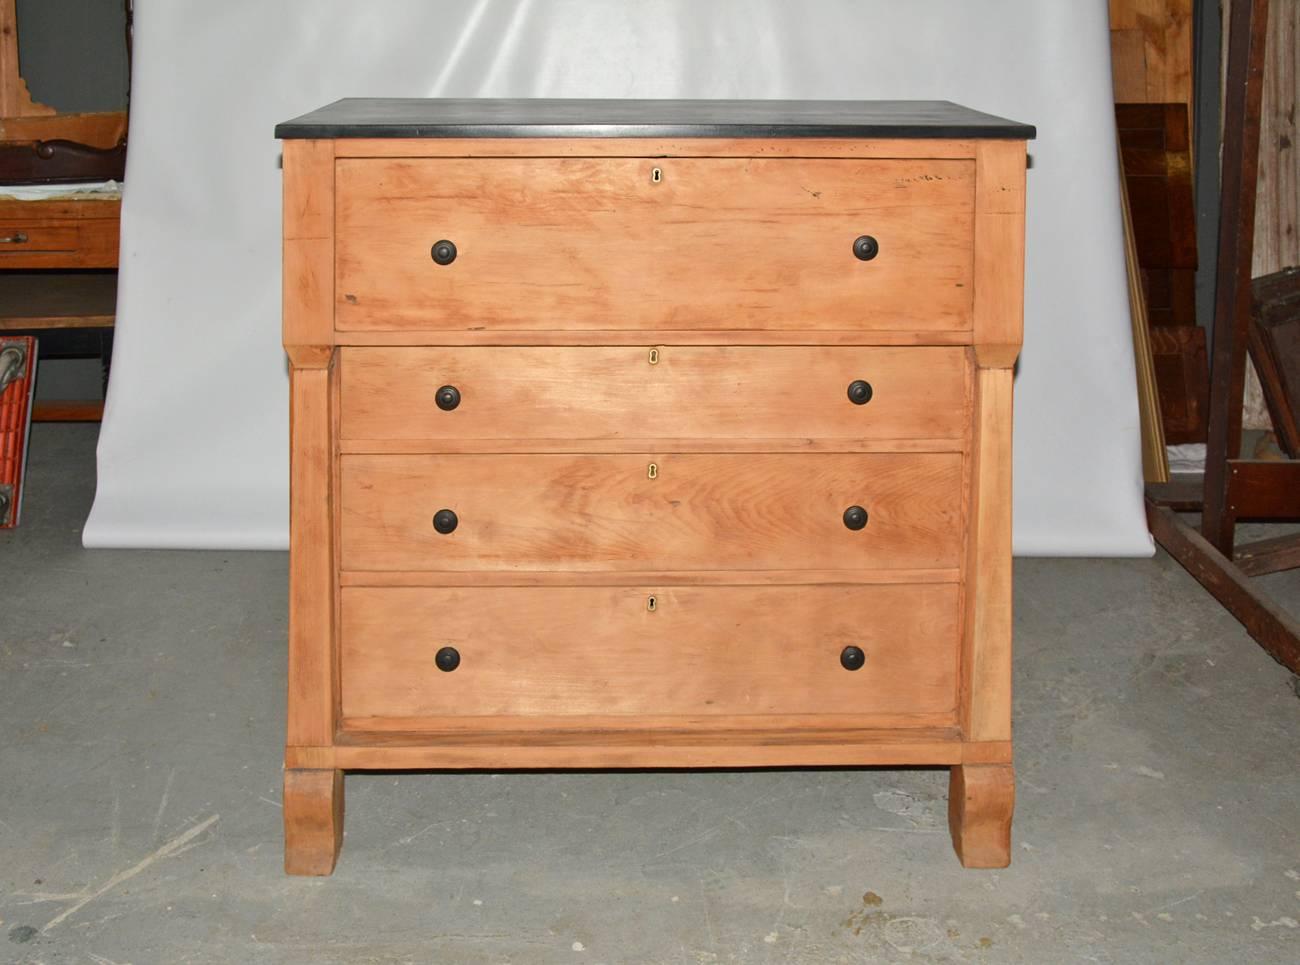 American Empire style bureau with handsome details. Four large drawers with replacement metal drawer pulls.